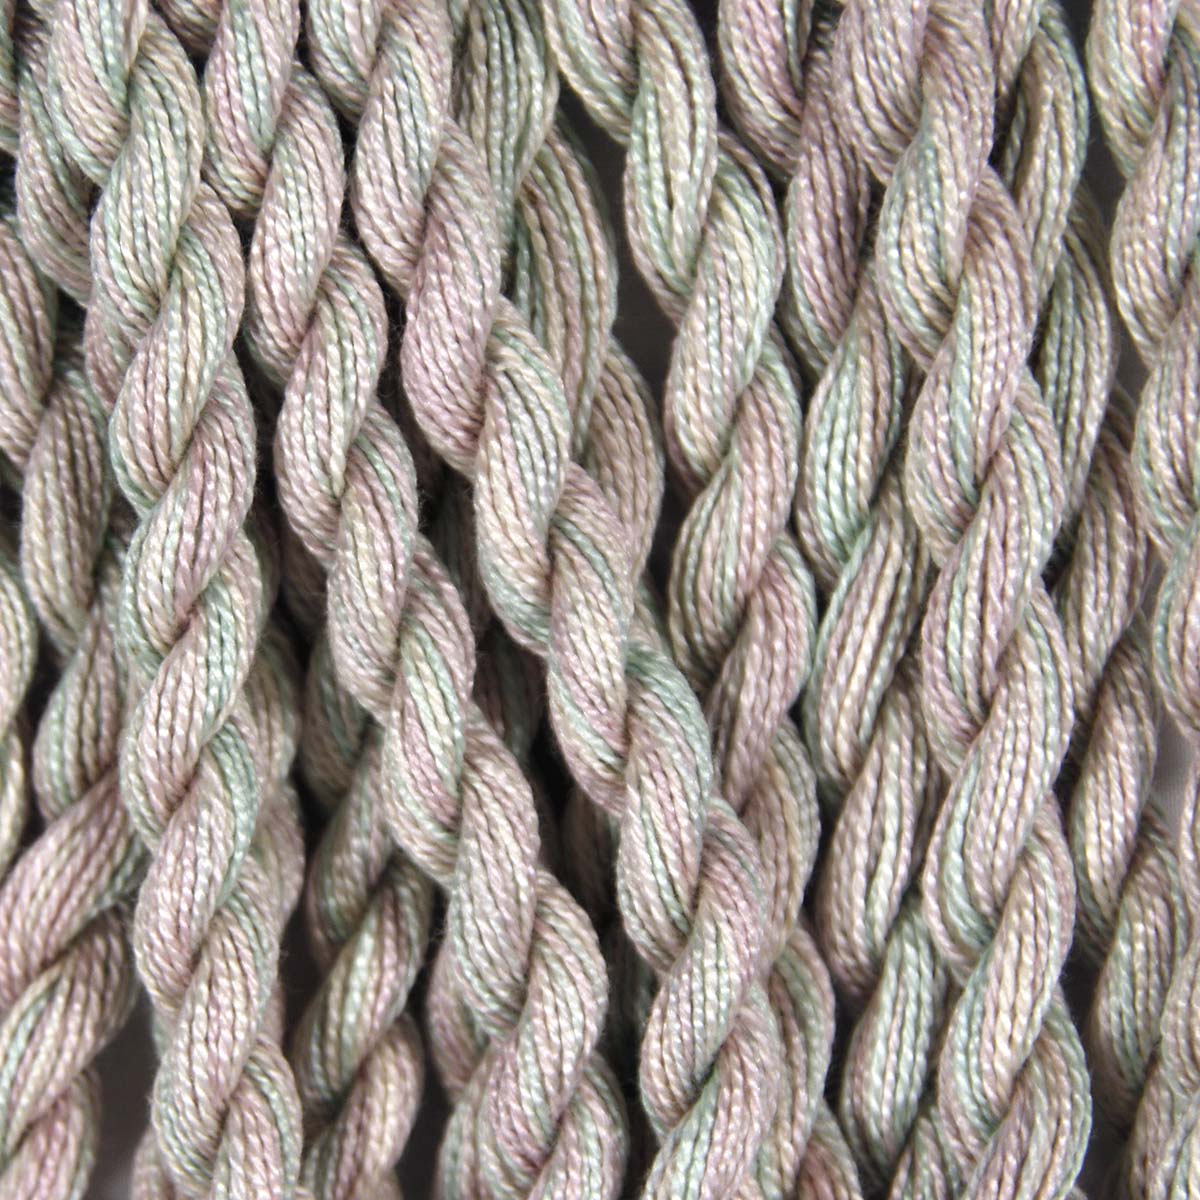 www.colourstreams.com.au Colour Streams Hand Dyed Cotton Threads Cotto Strands Slow Stitch Embroidery Textile Arts Fibre DL 44 Faded Rose Pinks Yellows Greens